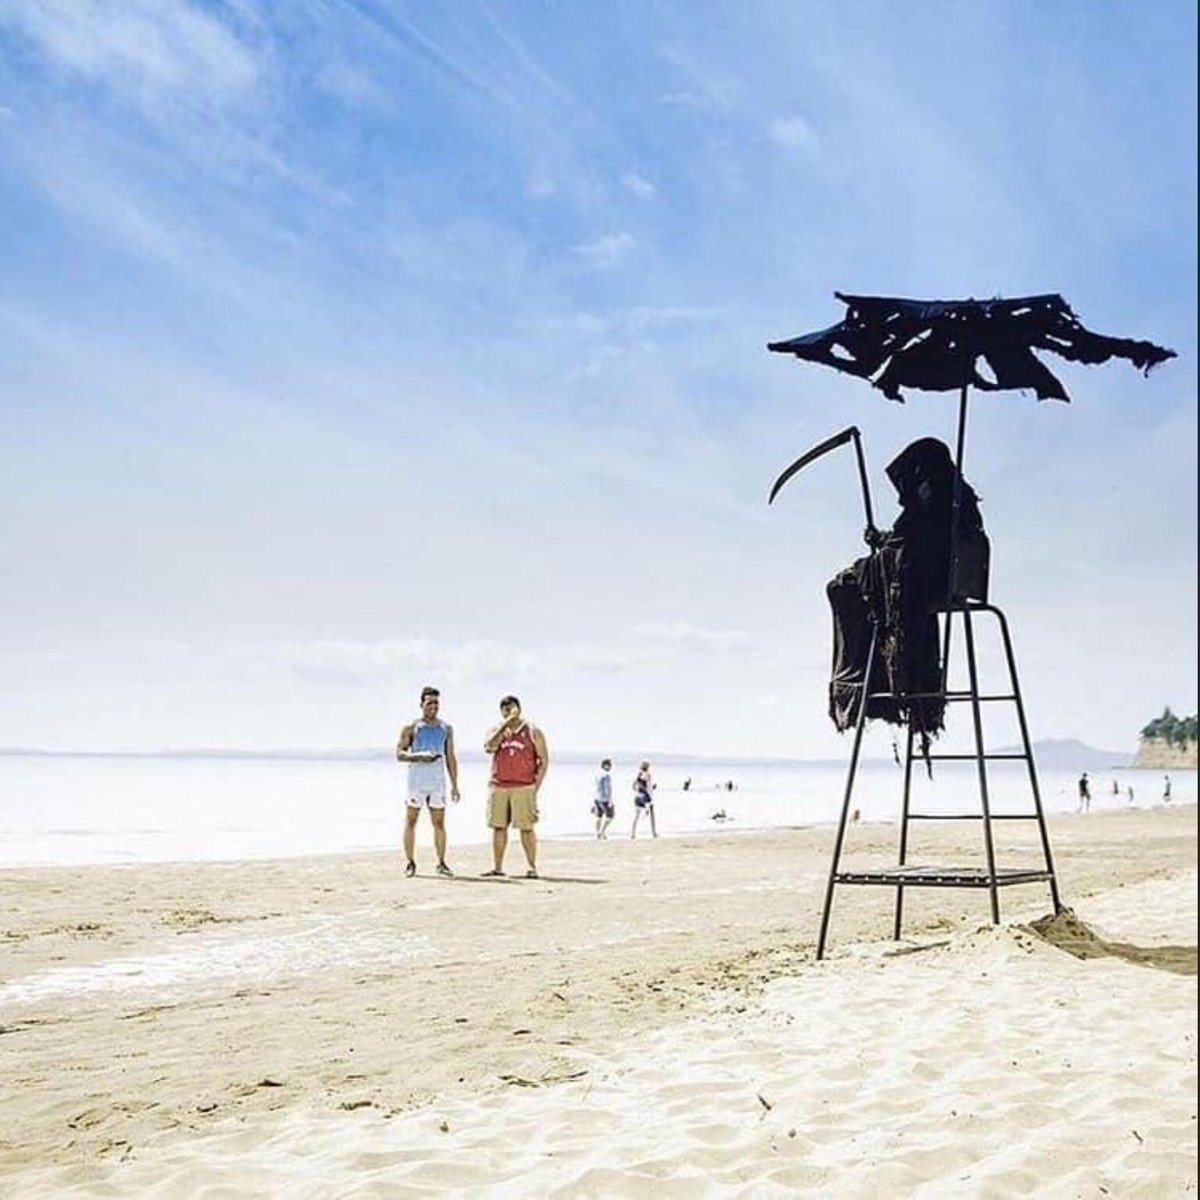 Florida Attorney Daniel Uhlfelder dressed up as the Grim Reaper, went to the beach,  and protested the reopening of beaches.